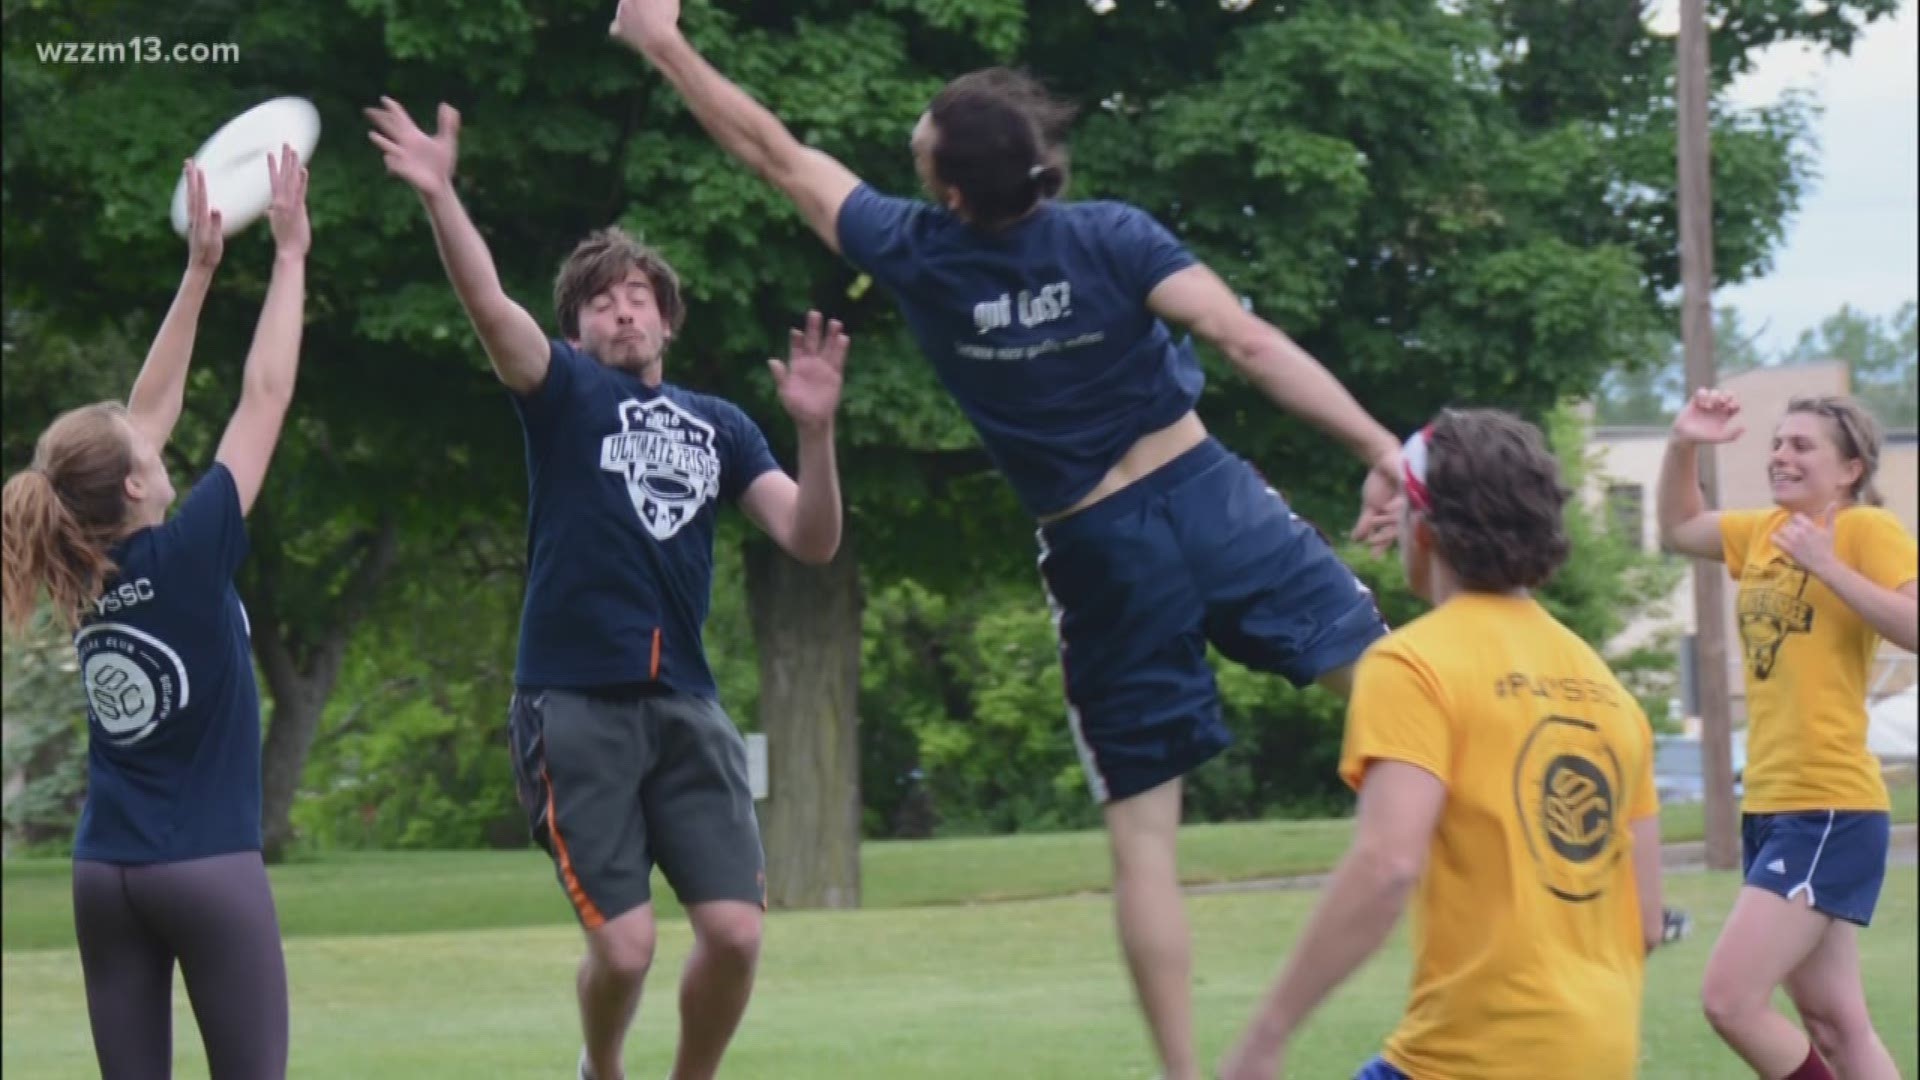 GRSSC offers different group sporting activities to help bring people together.